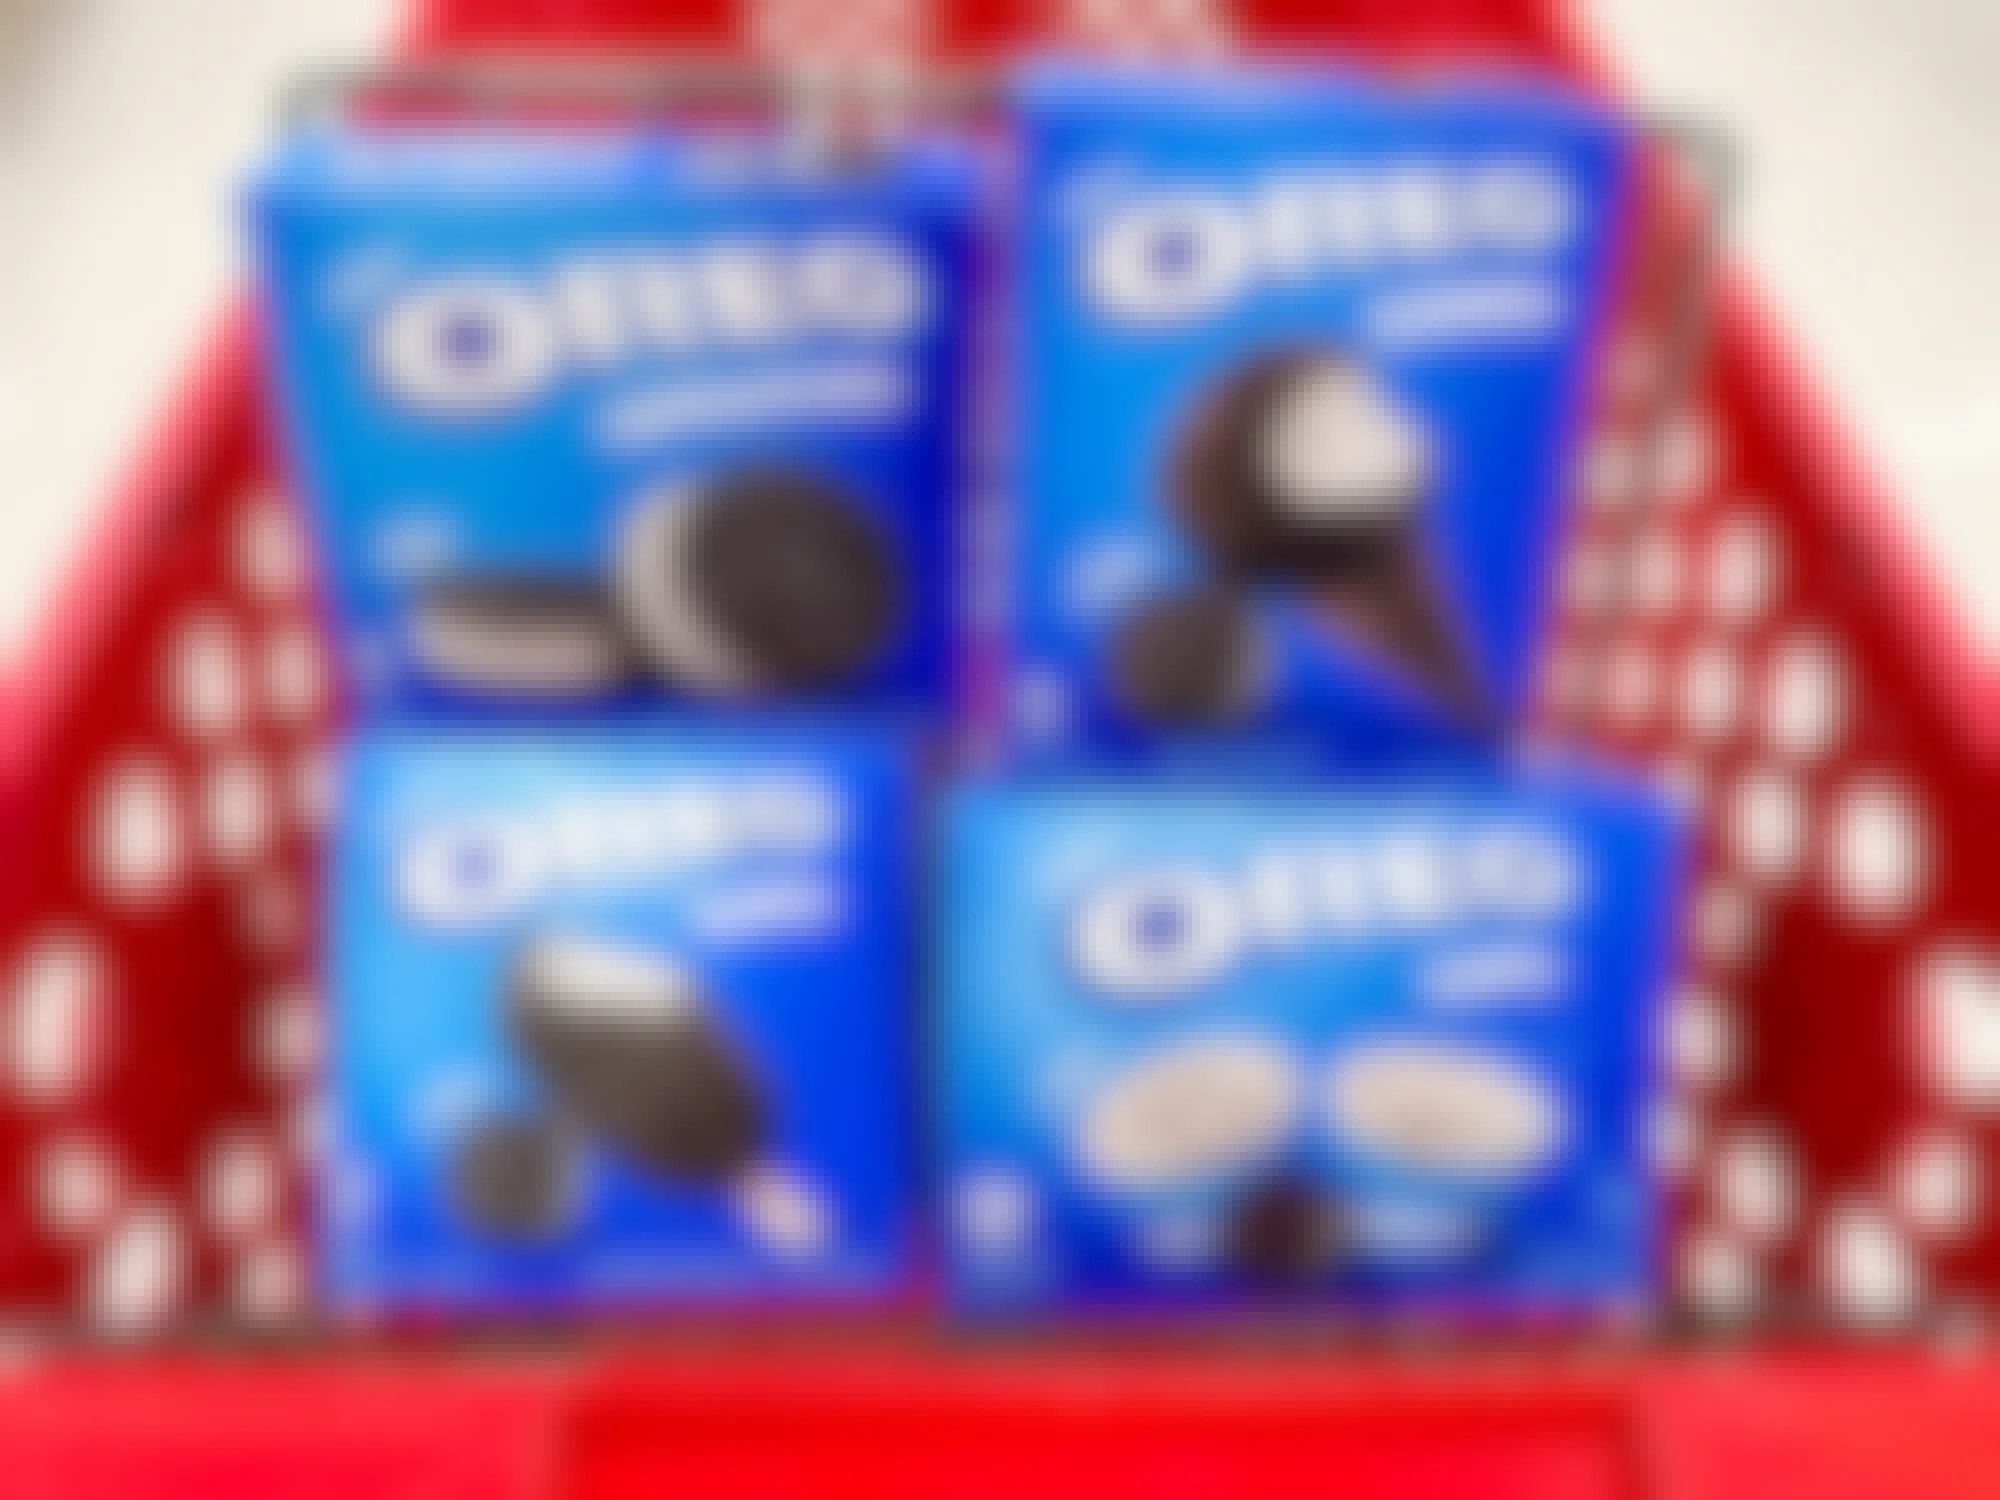 Four boxes of different kinds of Oreo frozen treats stacked in a Target cart